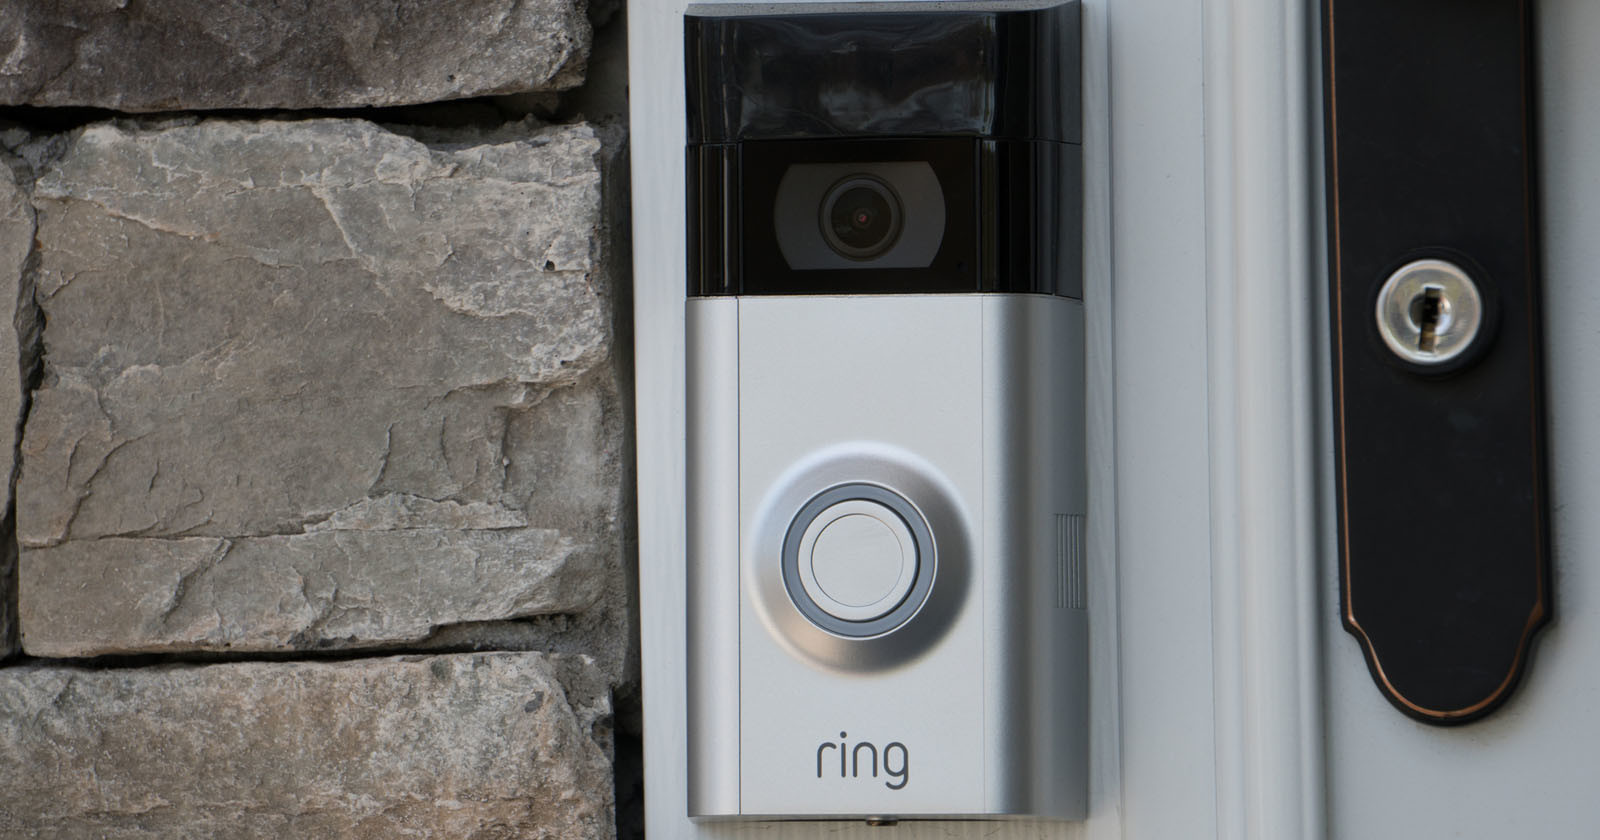  amazon gave ring camera footage police without asking 